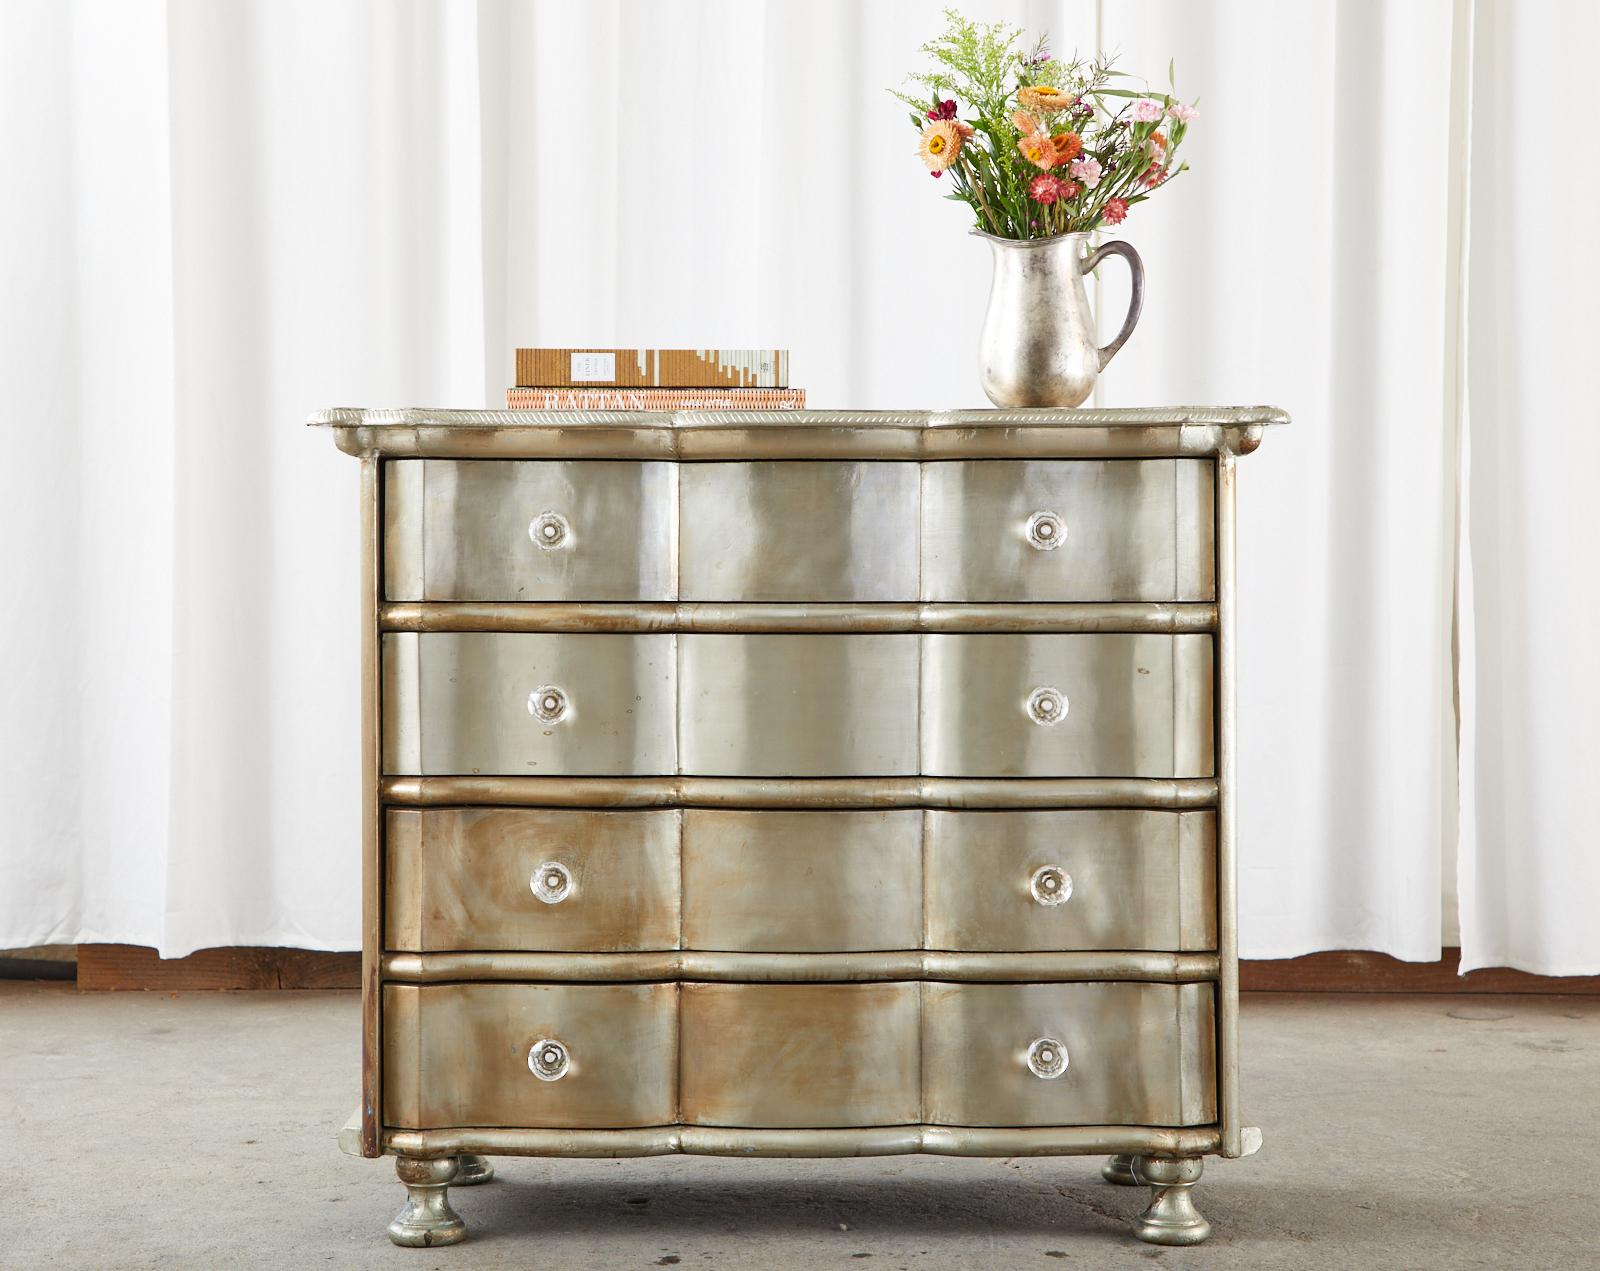 Dazzling pair of commodes, chests, or dressers featuring a hand-wrapped polished zinc sheet metal veneer. The zinc metal is secured with hundreds of hand-hammered tiny nails in a painstaking laborious process. The chests are crafted from a wood case